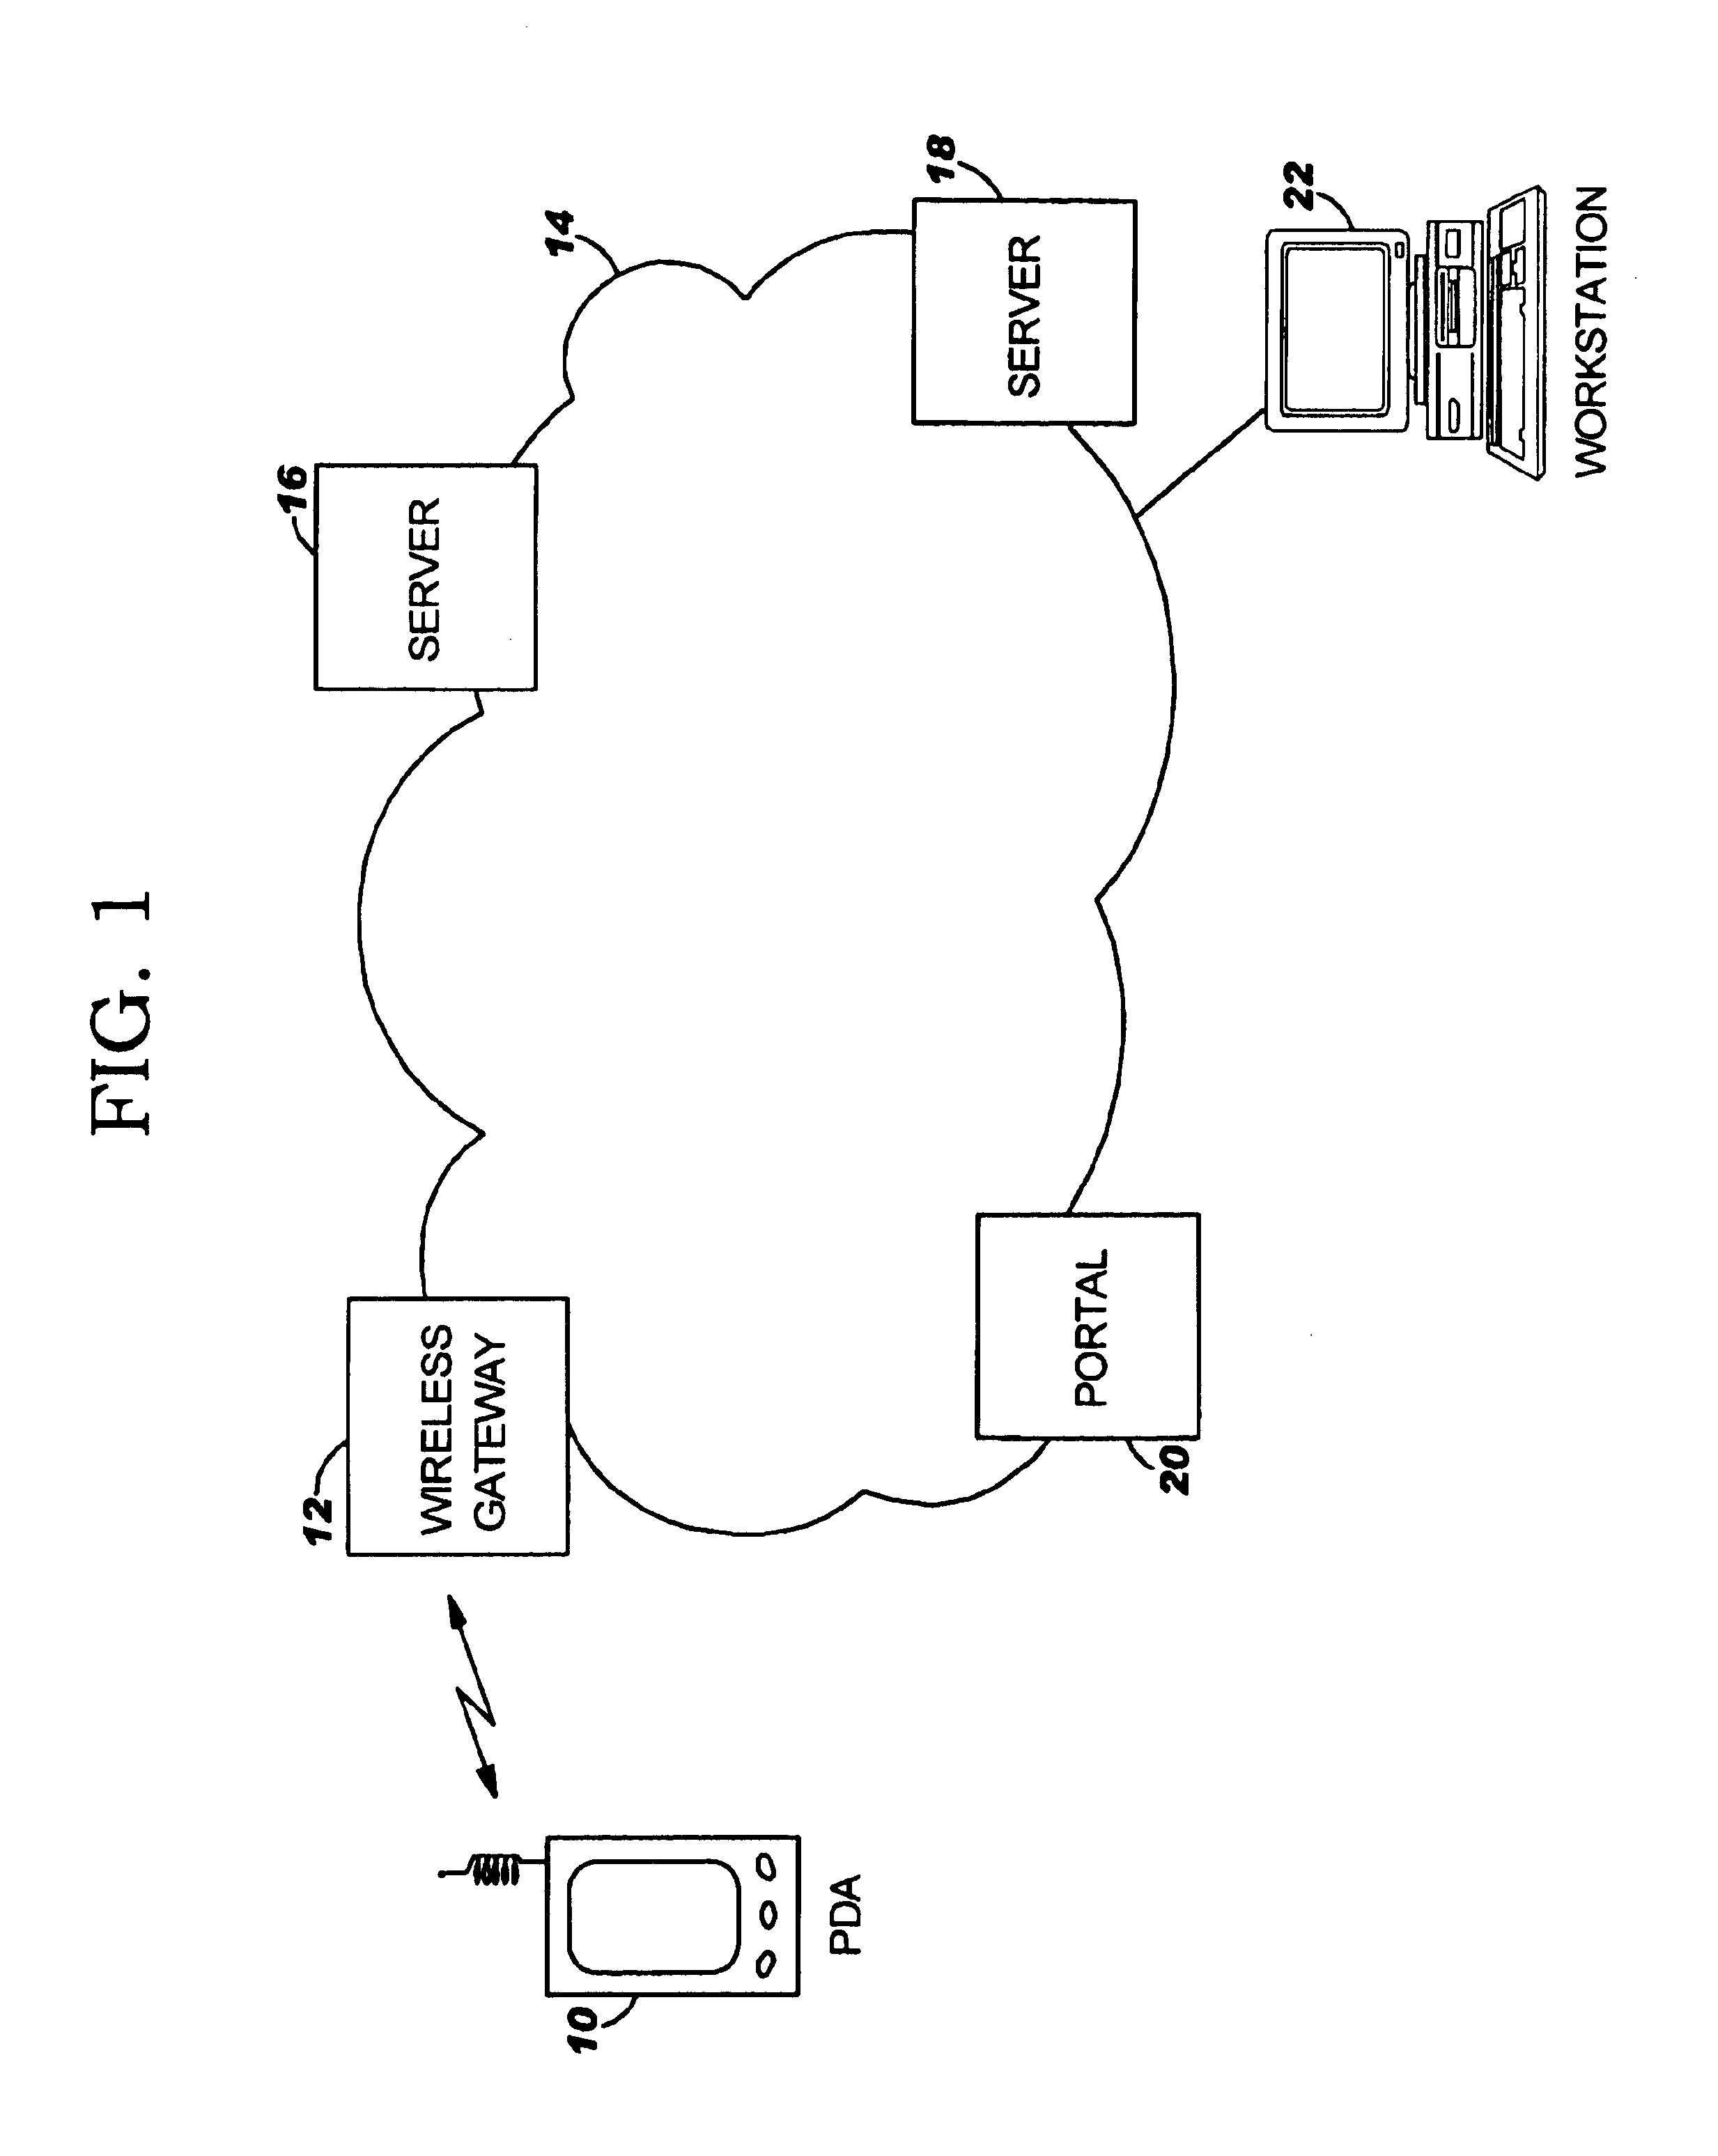 Server assisted system for accessing web pages from a personal data assistant